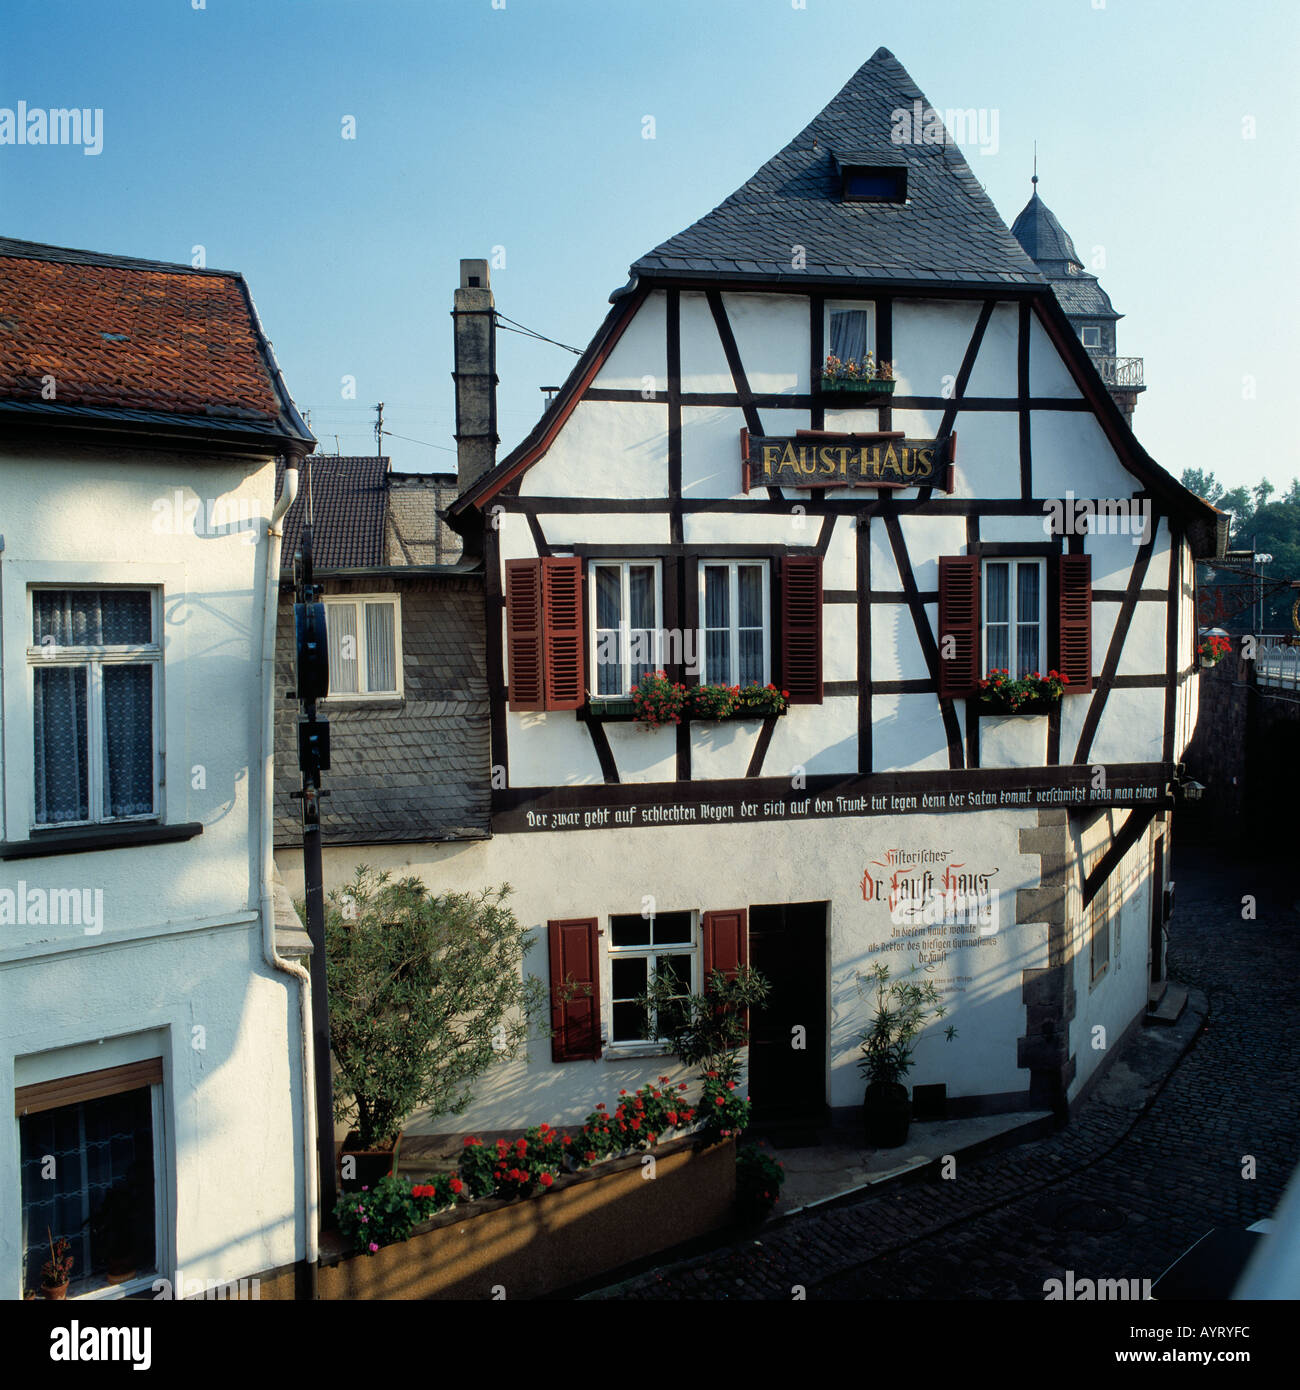 Von Kreuznach High Resolution Stock Photography and Images - Alamy